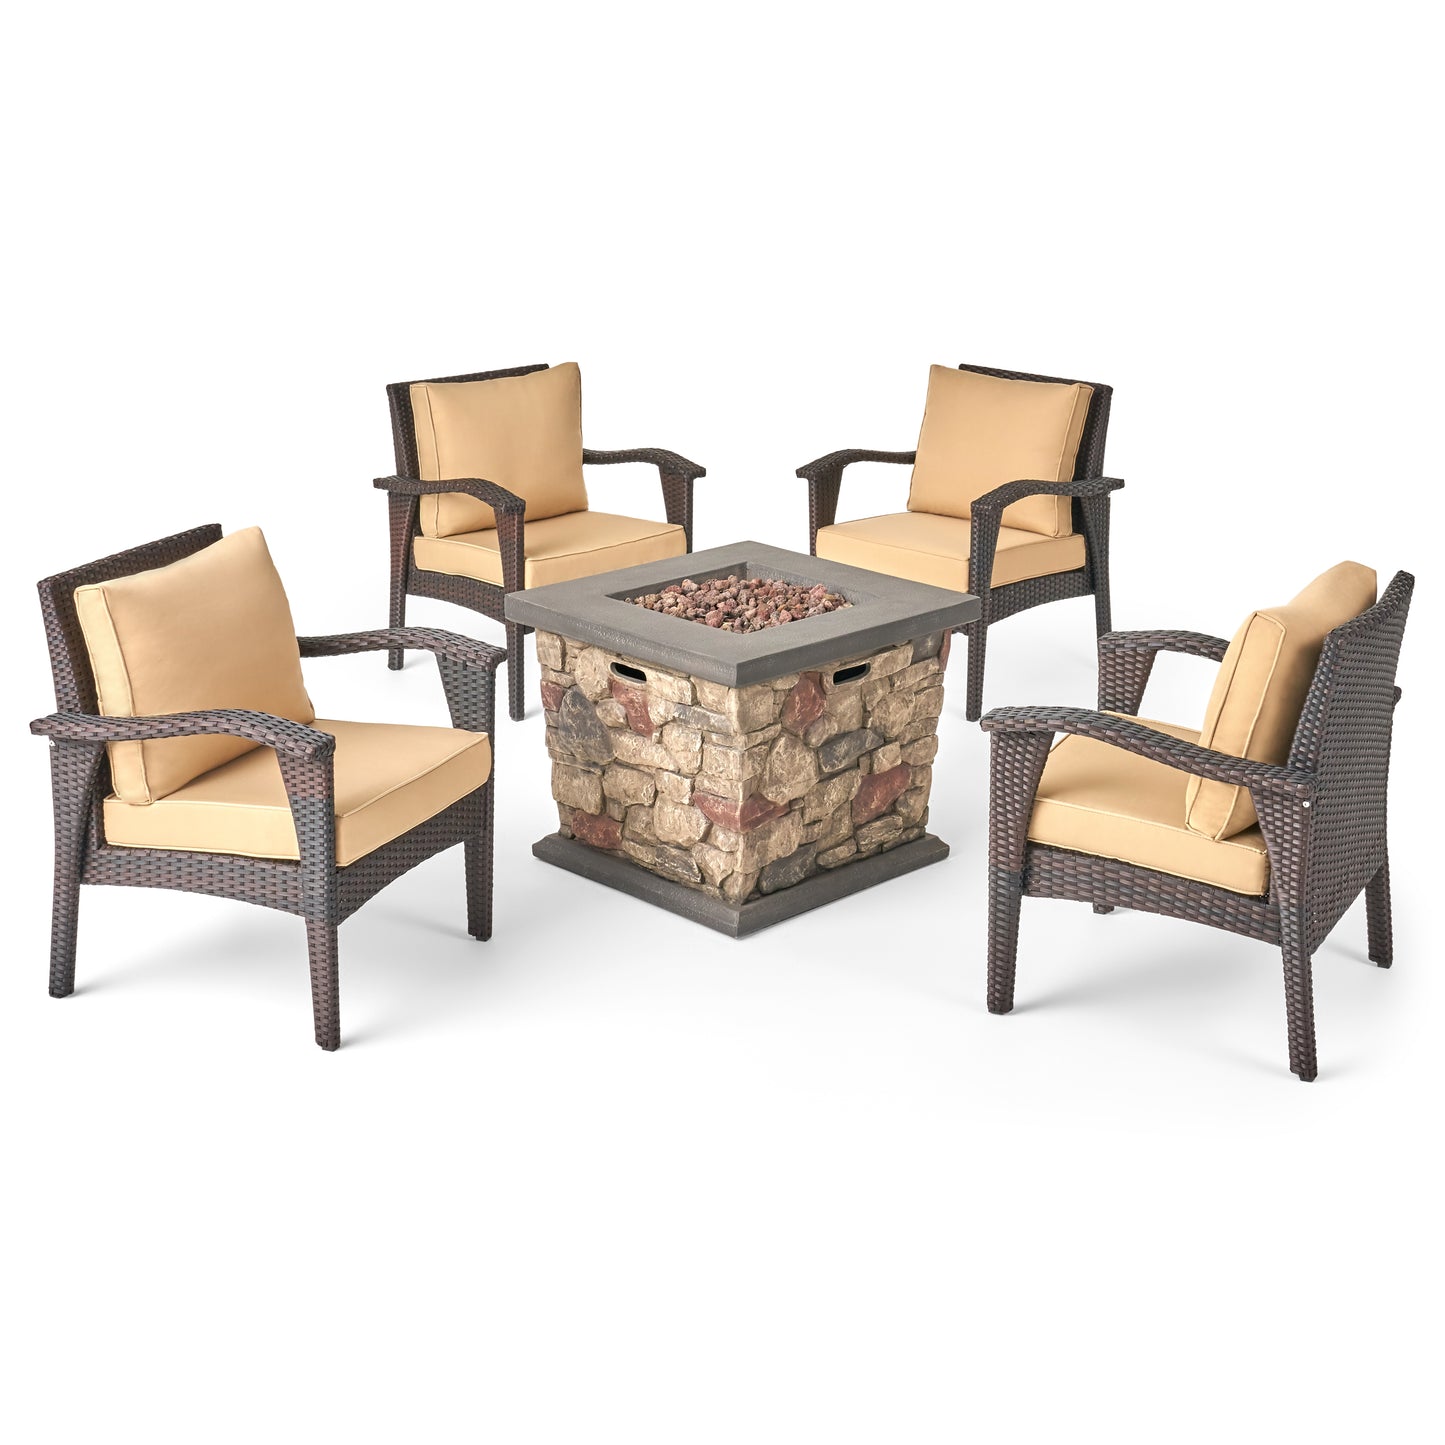 Makenah Outdoor 4 Club Chair Chat Set with Fire Pit